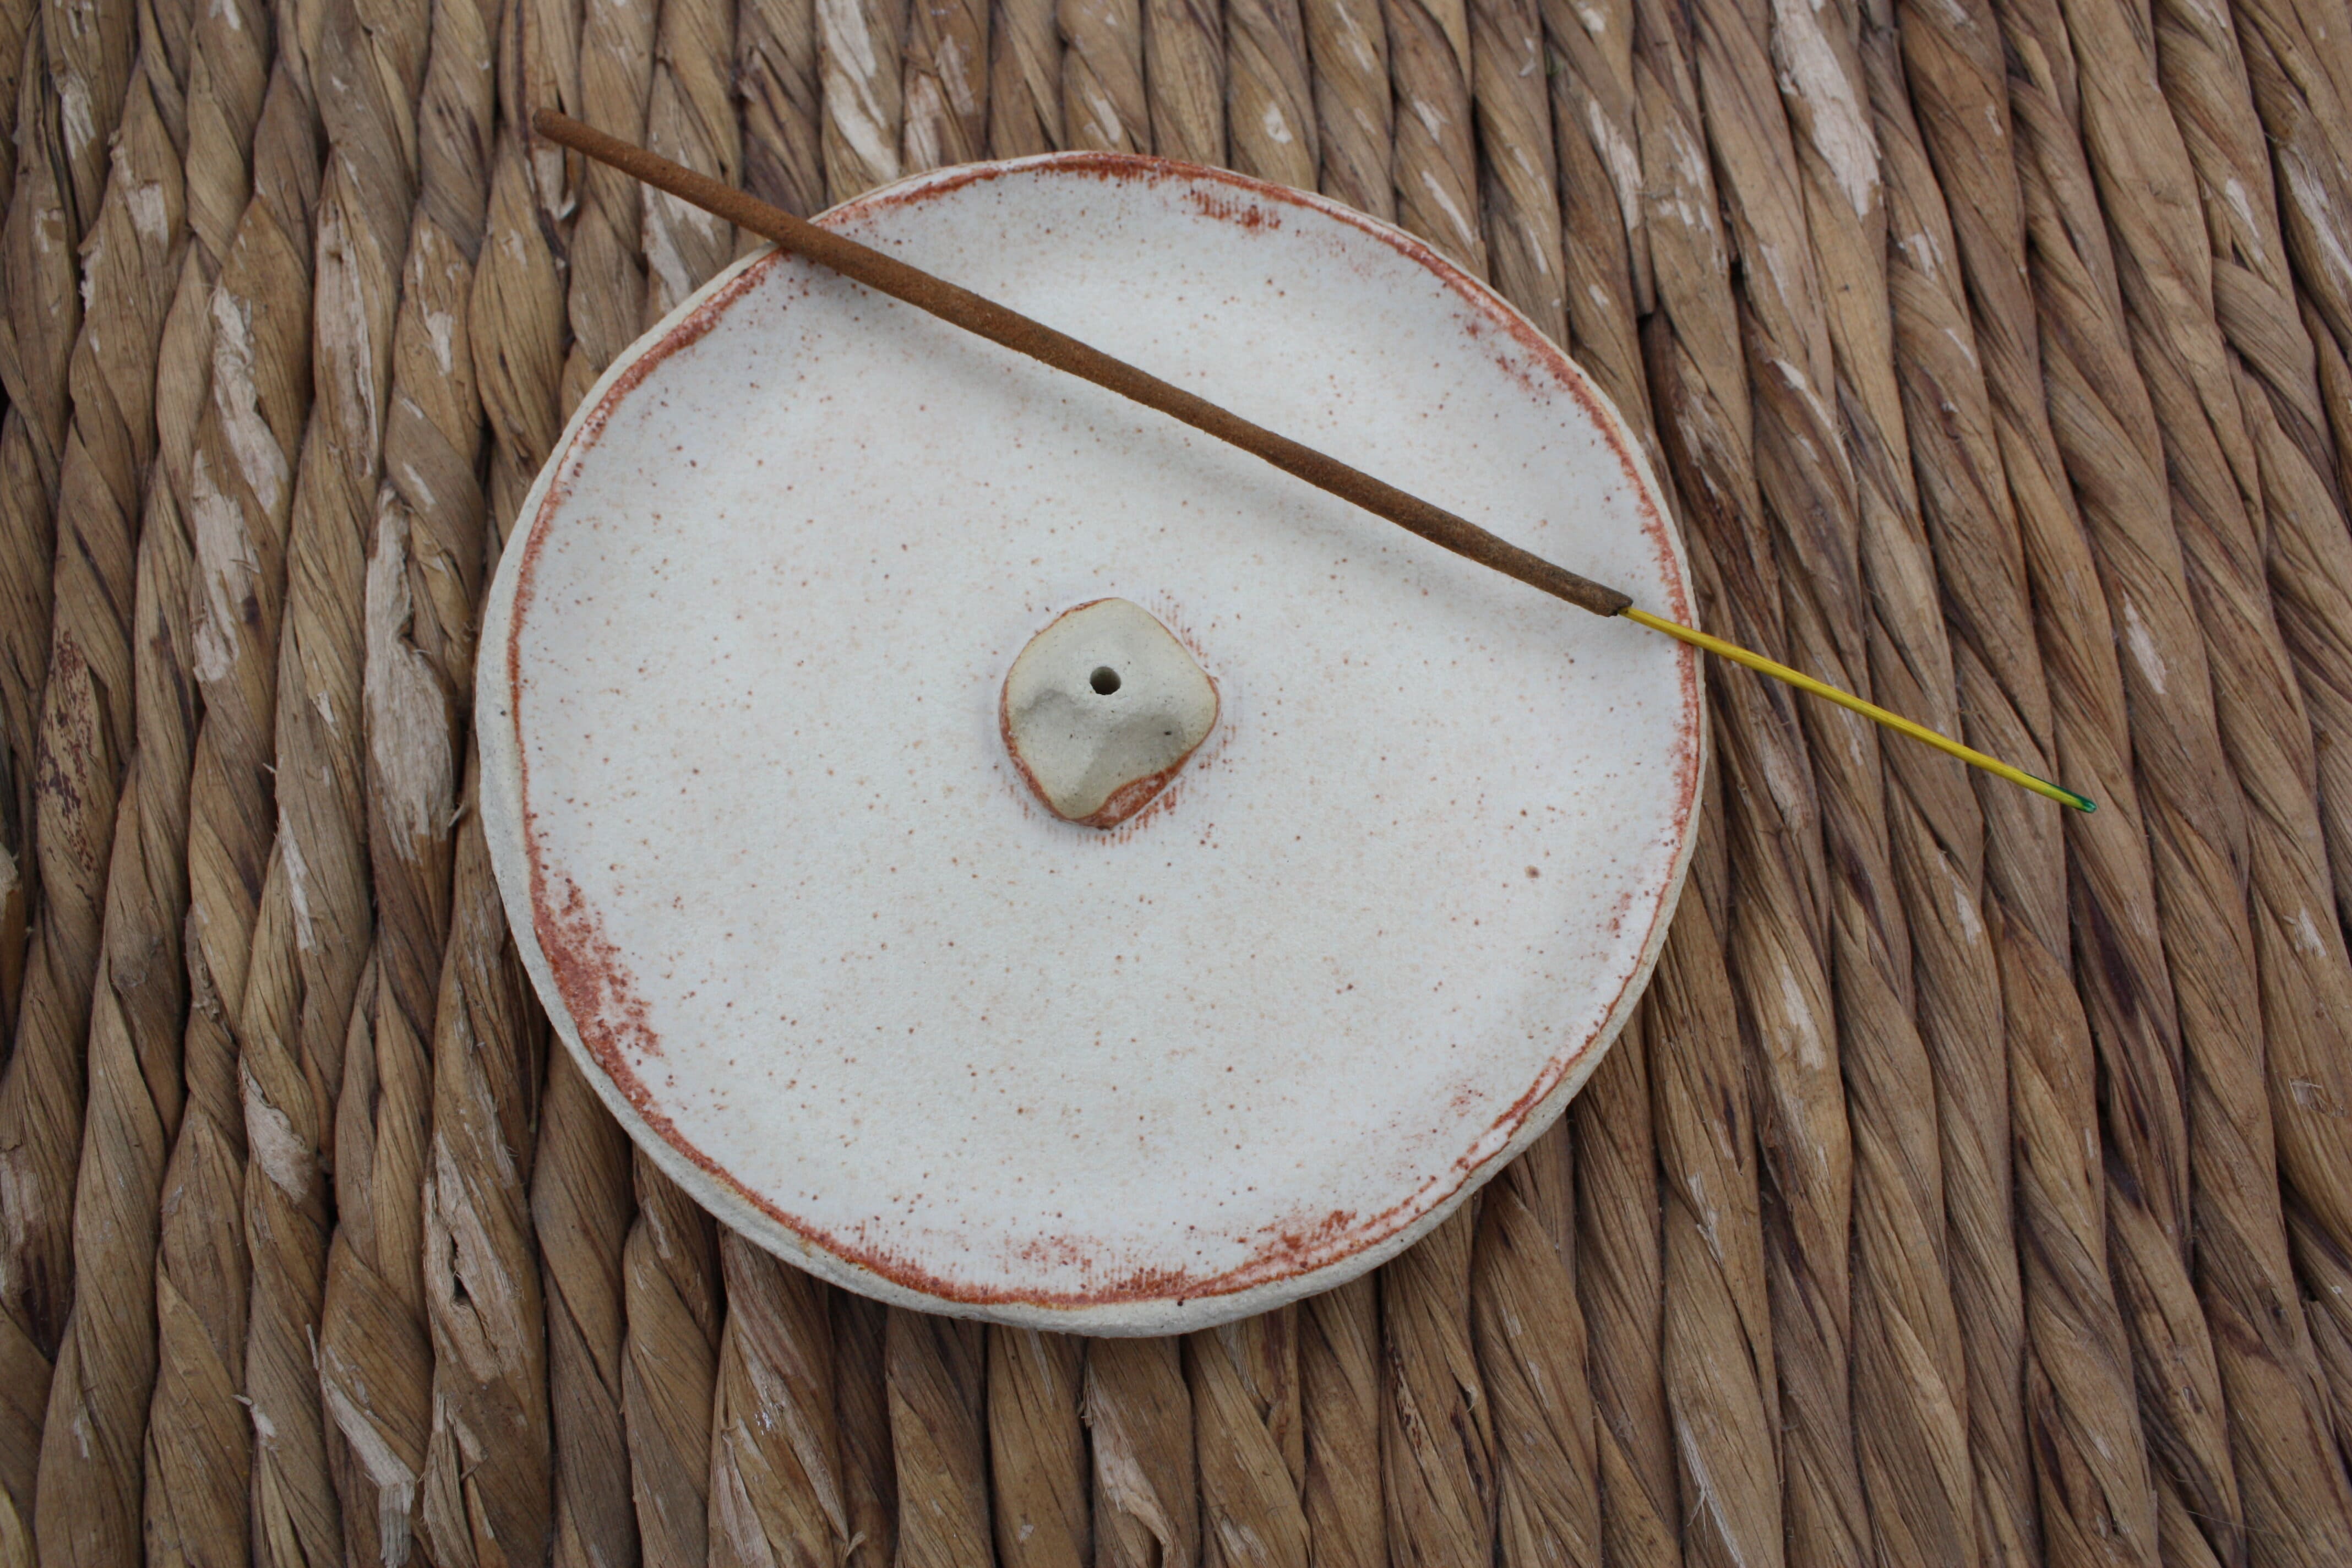 Ceramic Incense Holder - Available in 4 Colours